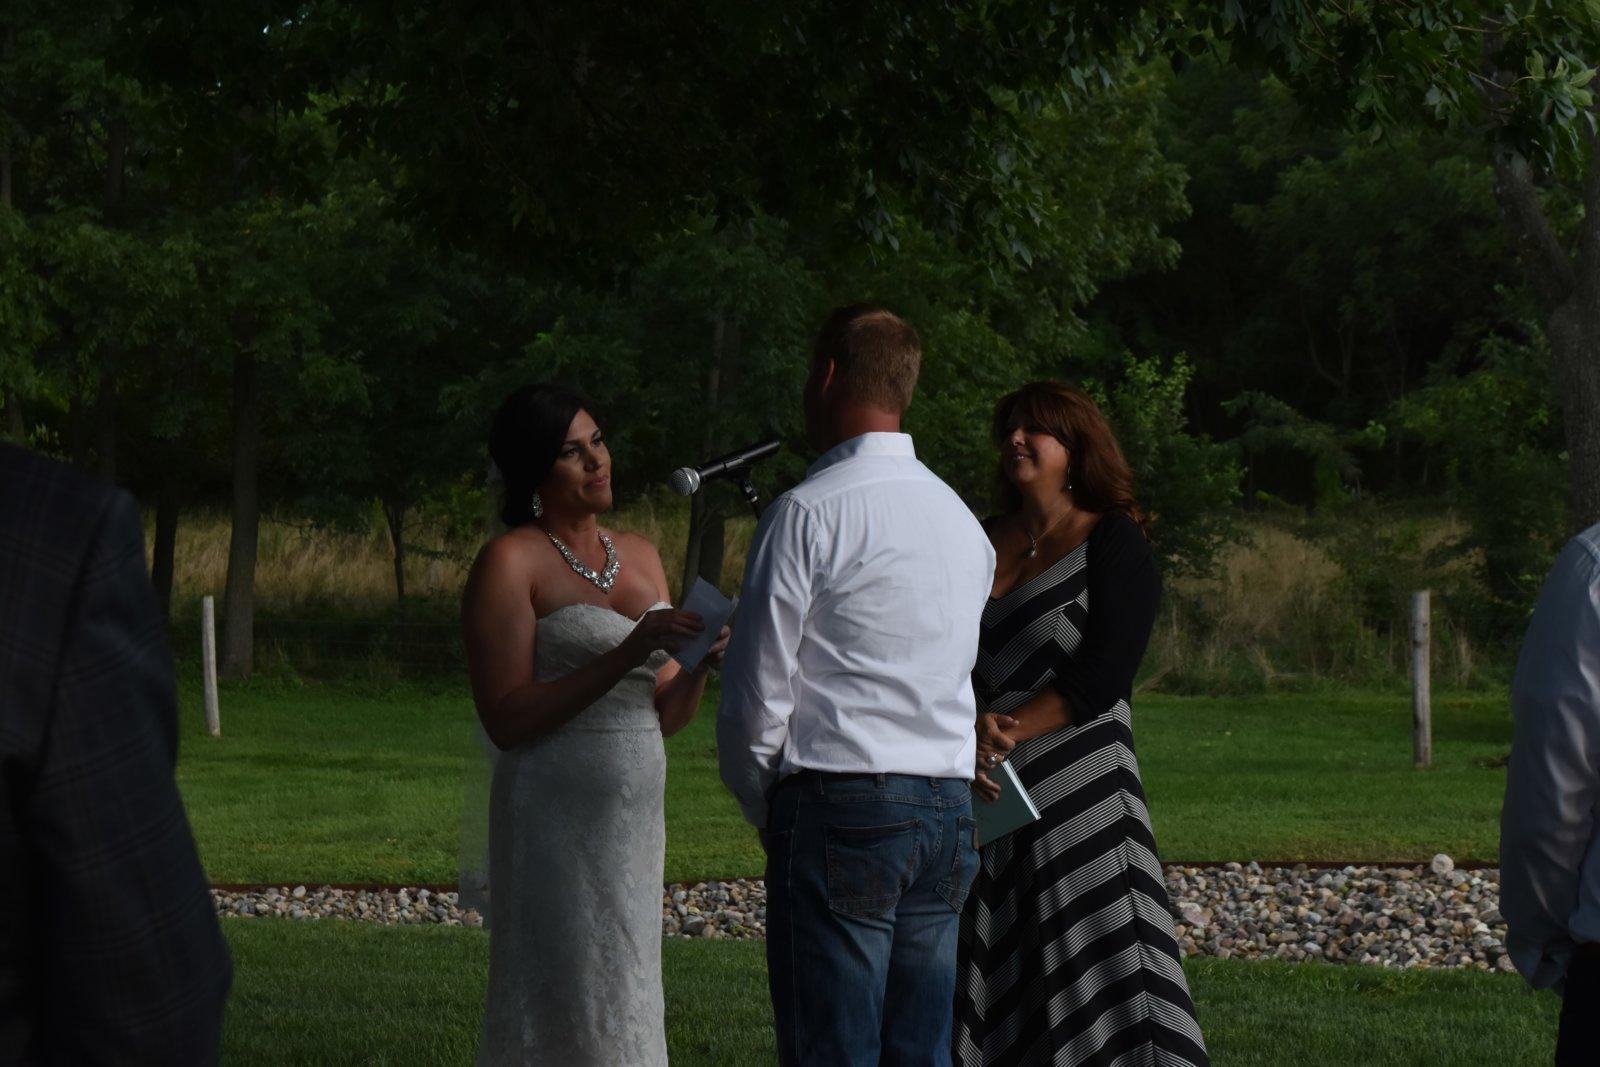 Tearing up during their vows.